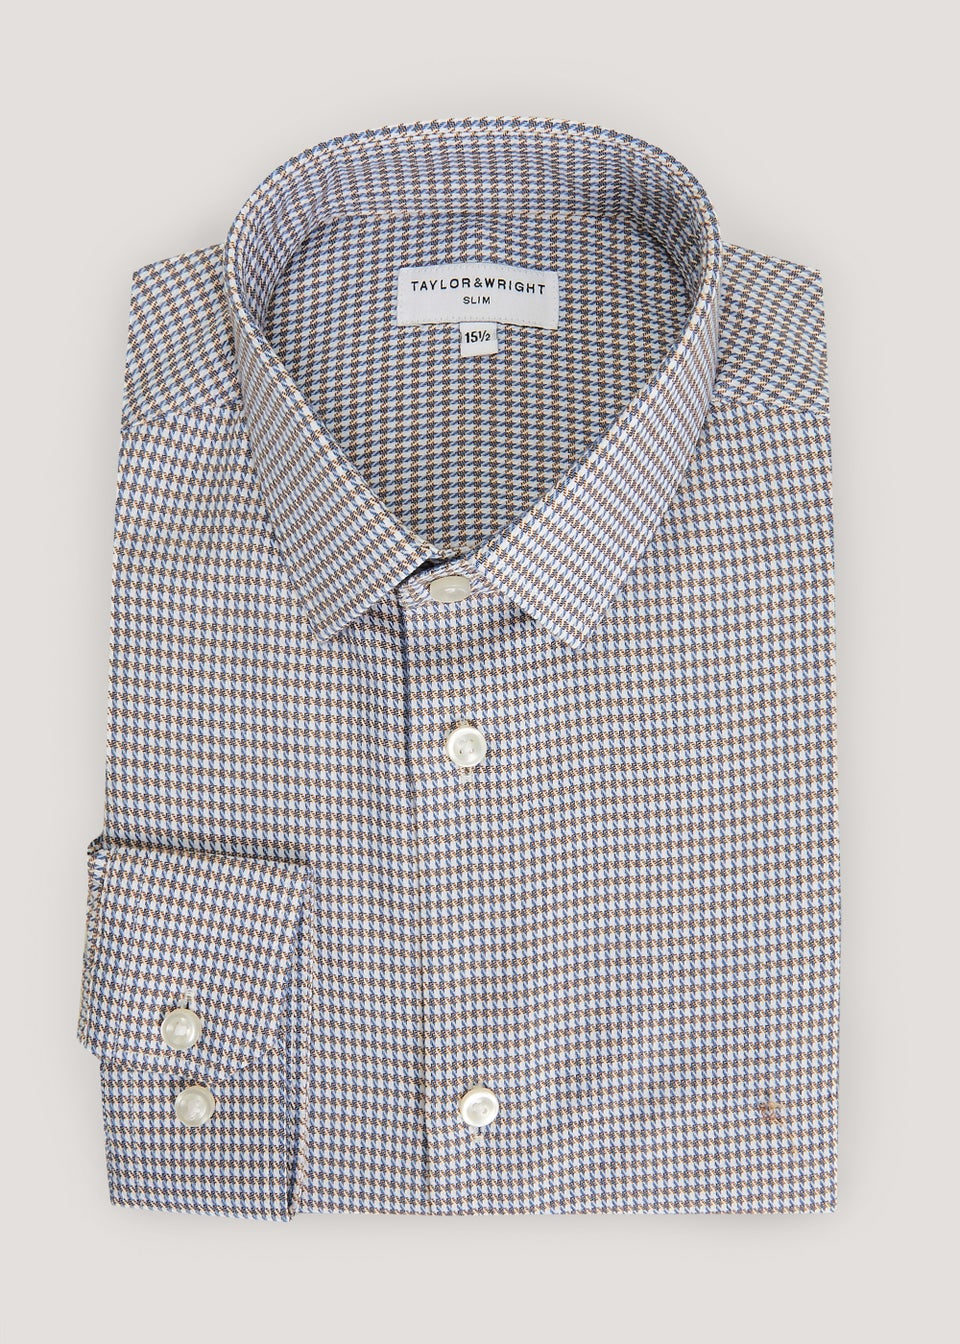 Taylor & Wright Navy Puppytooth Slim Fit Shirt